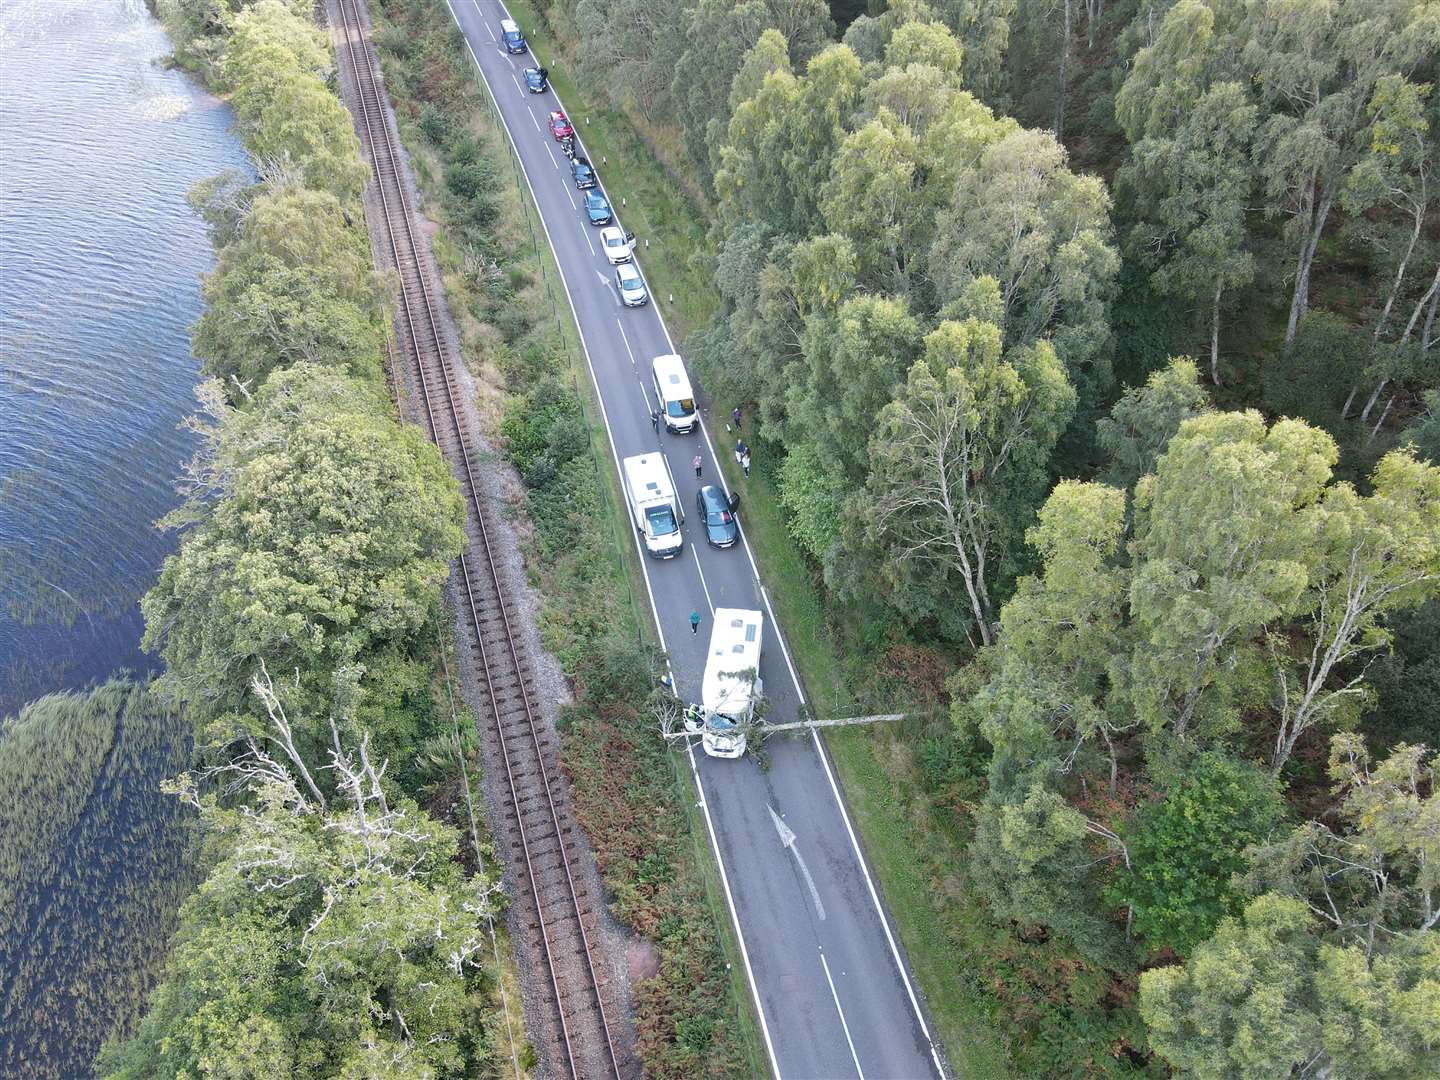 Ryan Huddlestone shared this drone image of the scene of the accident.